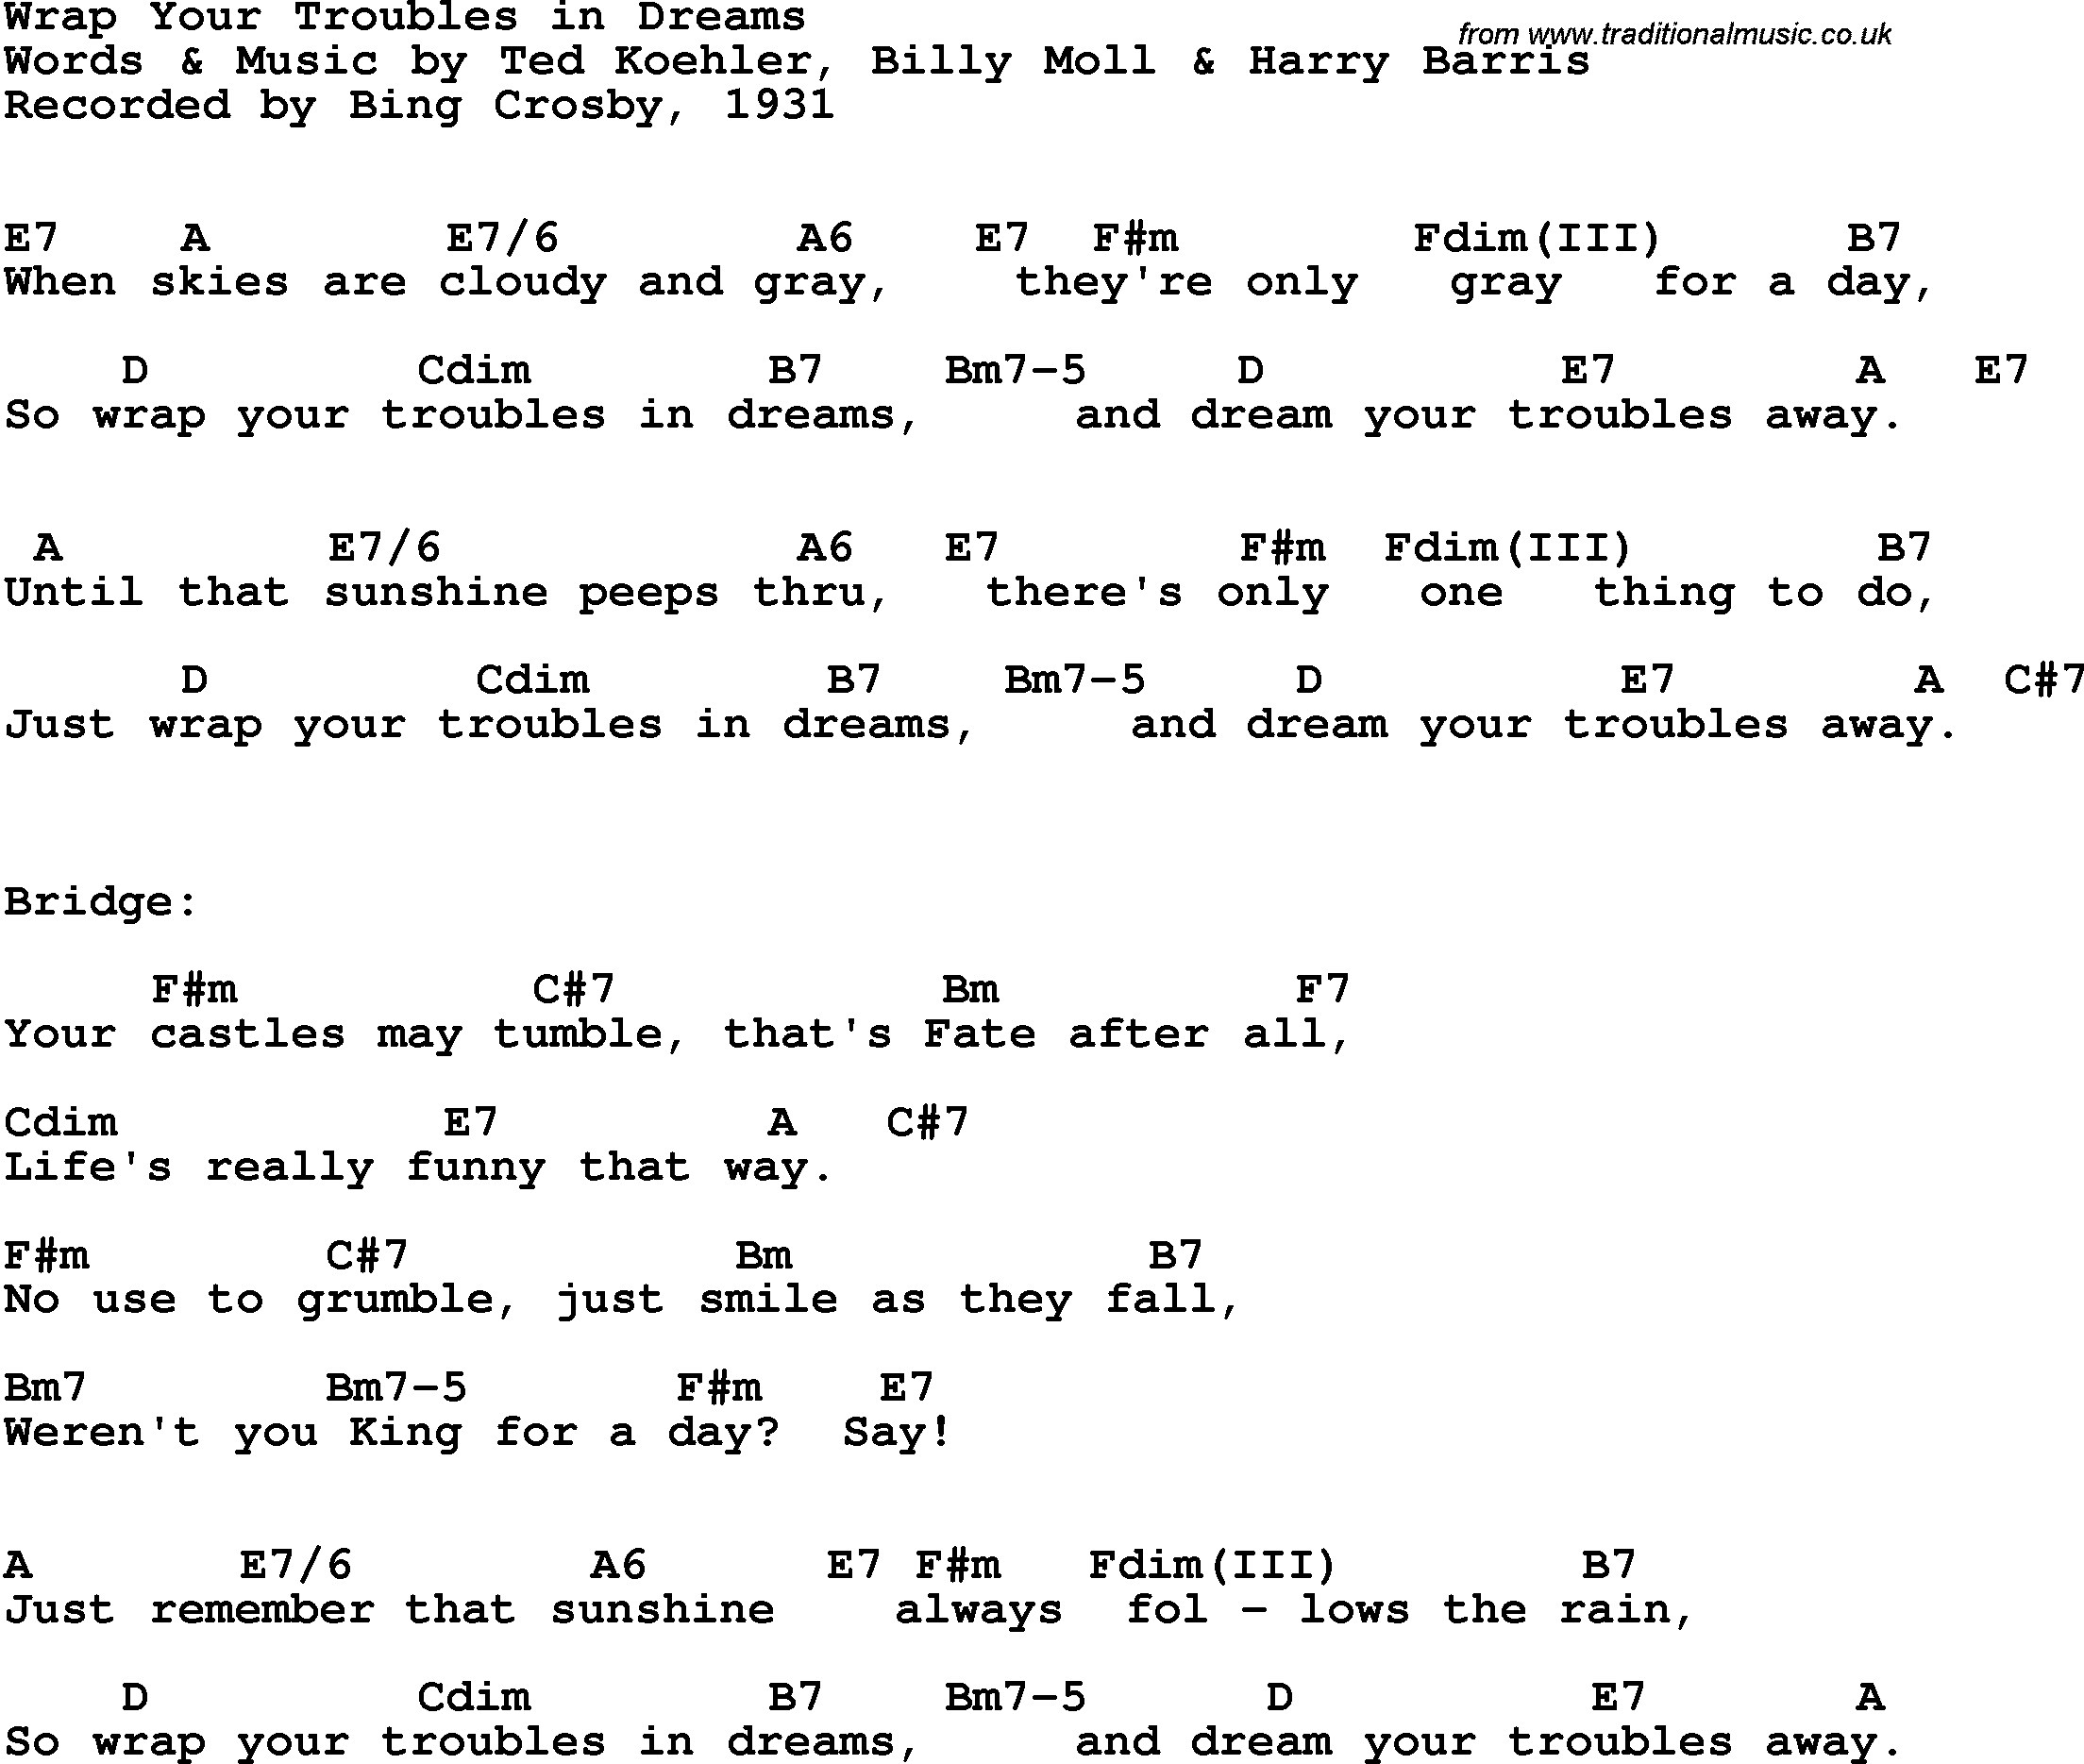 Song Lyrics with guitar chords for Wrap Your Troubles In Dreams - Bing Crosby, 1931